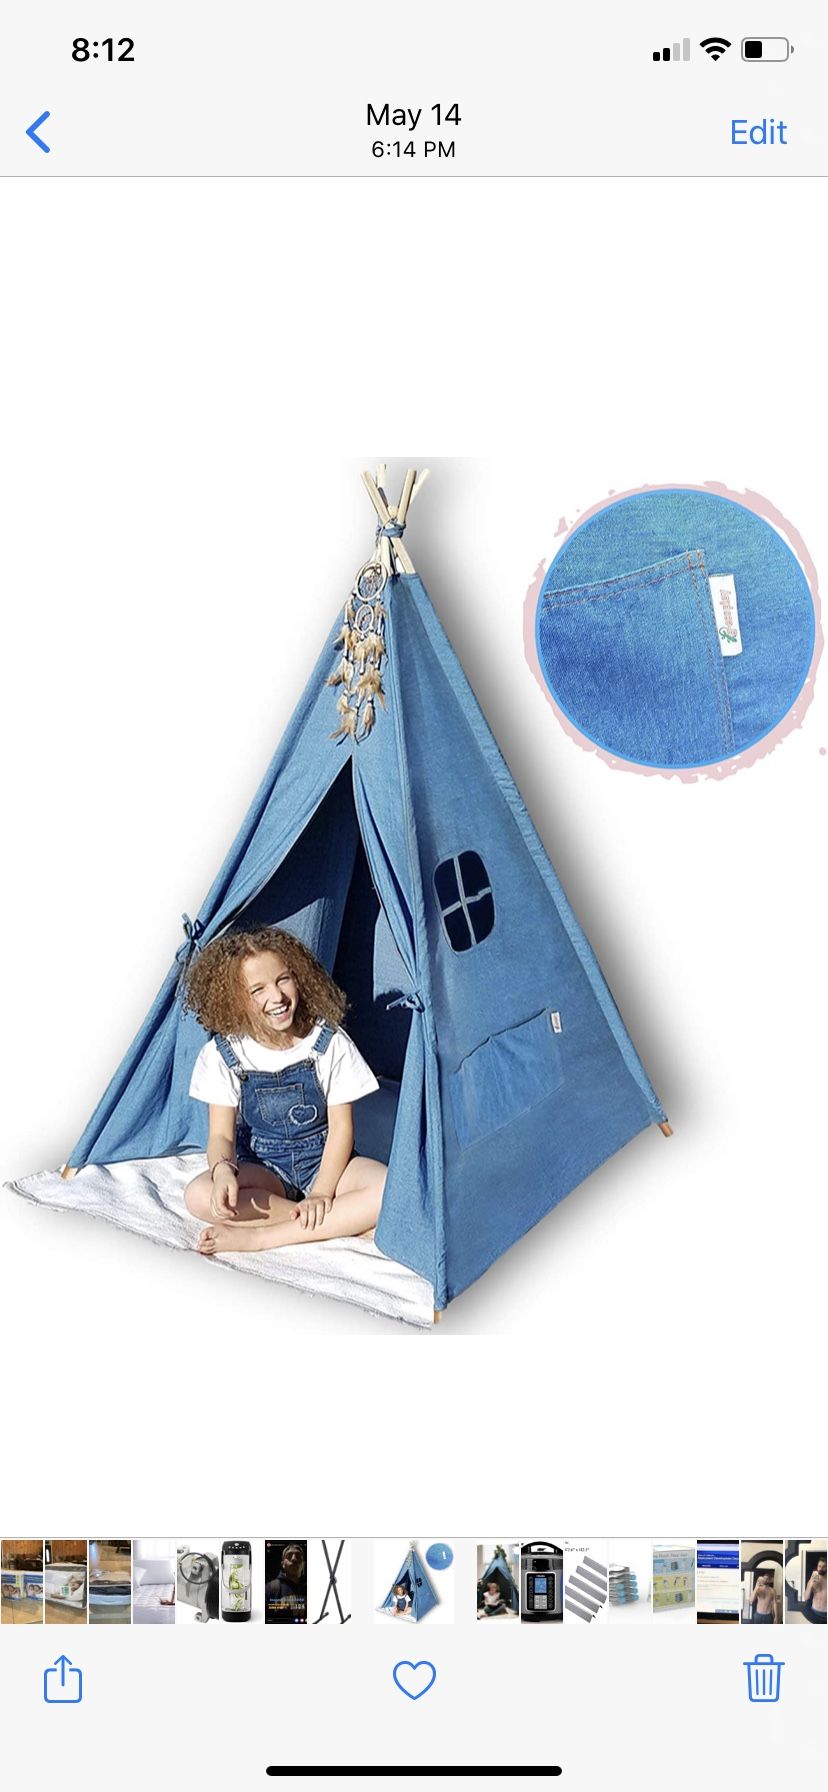 G-Eco Play Teepee Tent for Kids, Blue Denim, Children Toy Playhouse with Canvas Carry Bag, Gift for Girls and Boys Indoor and Outdoor, 4 Pole Foldabl